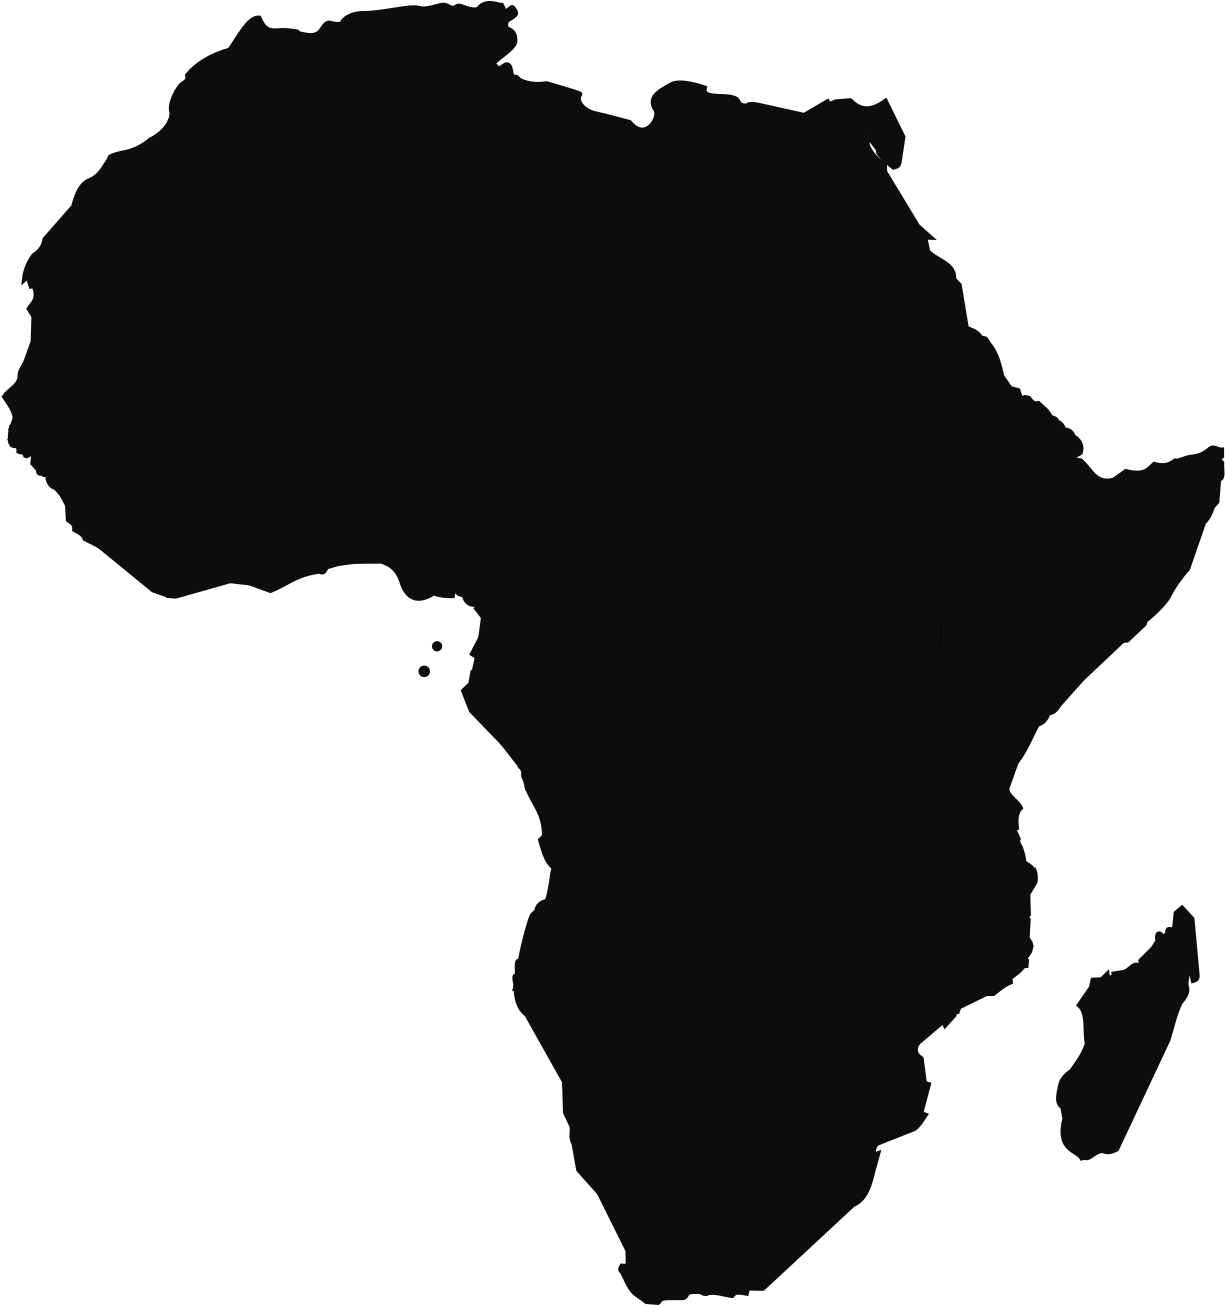 Open - Black Silhouette Of Africa (2000x1304)